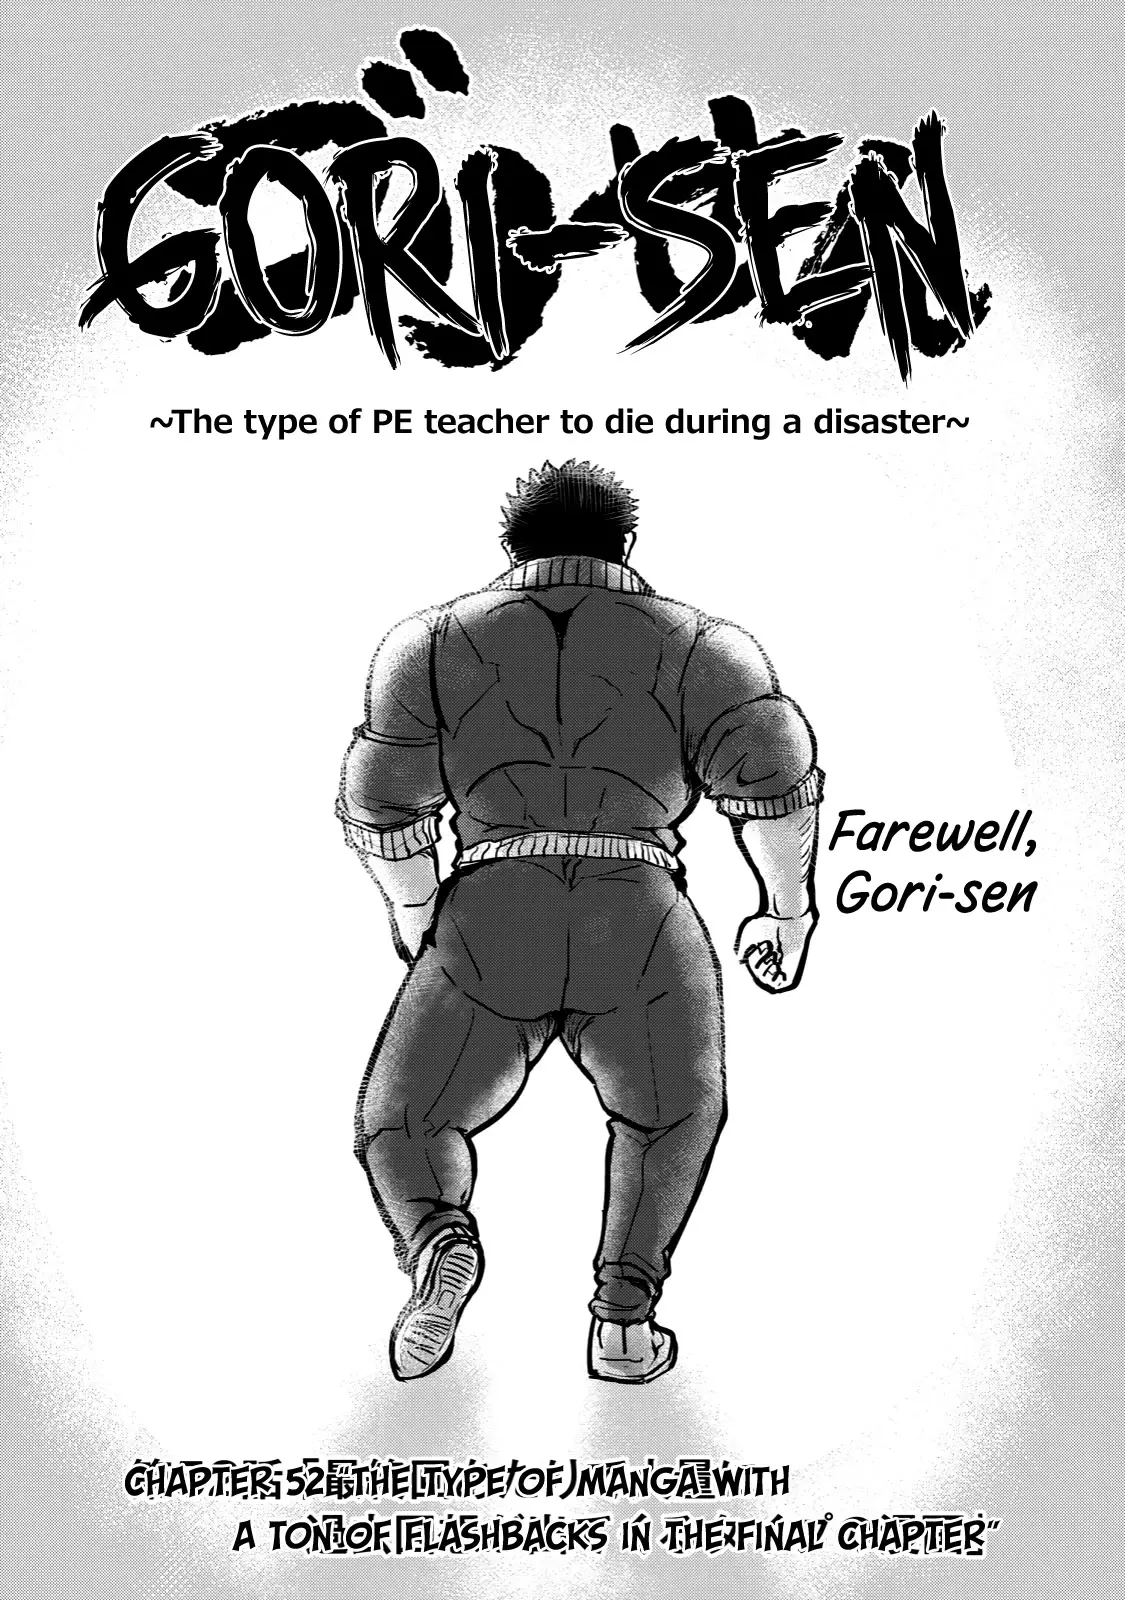 A Manga About The Kind Of Pe Teacher Who Dies At The Start Of A School Horror Movie - 52 page 1-55ca9b7a